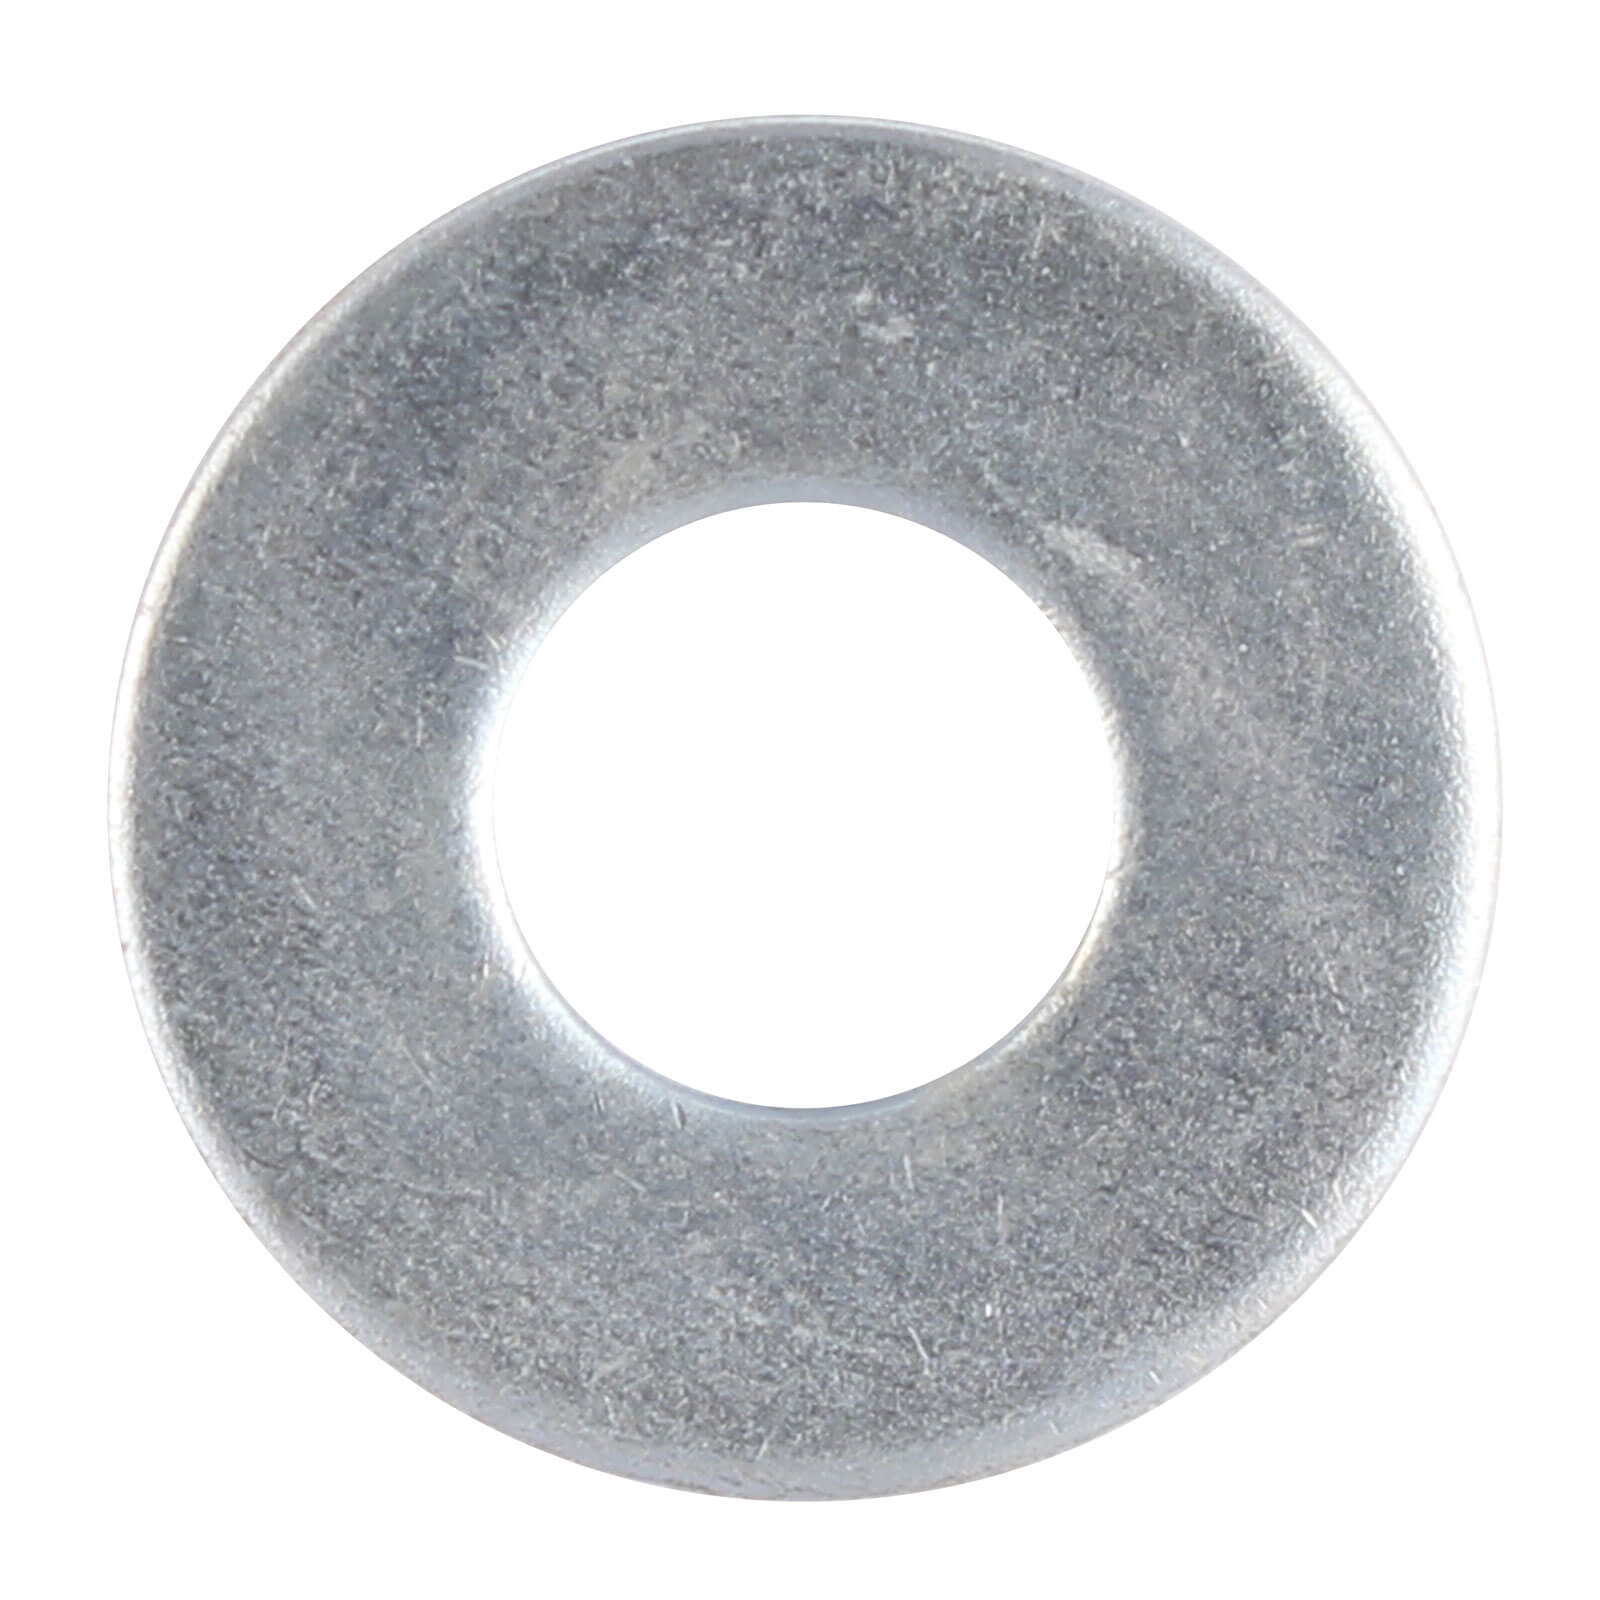 Image of Washer Stainless Steel 6mm Pack of 20